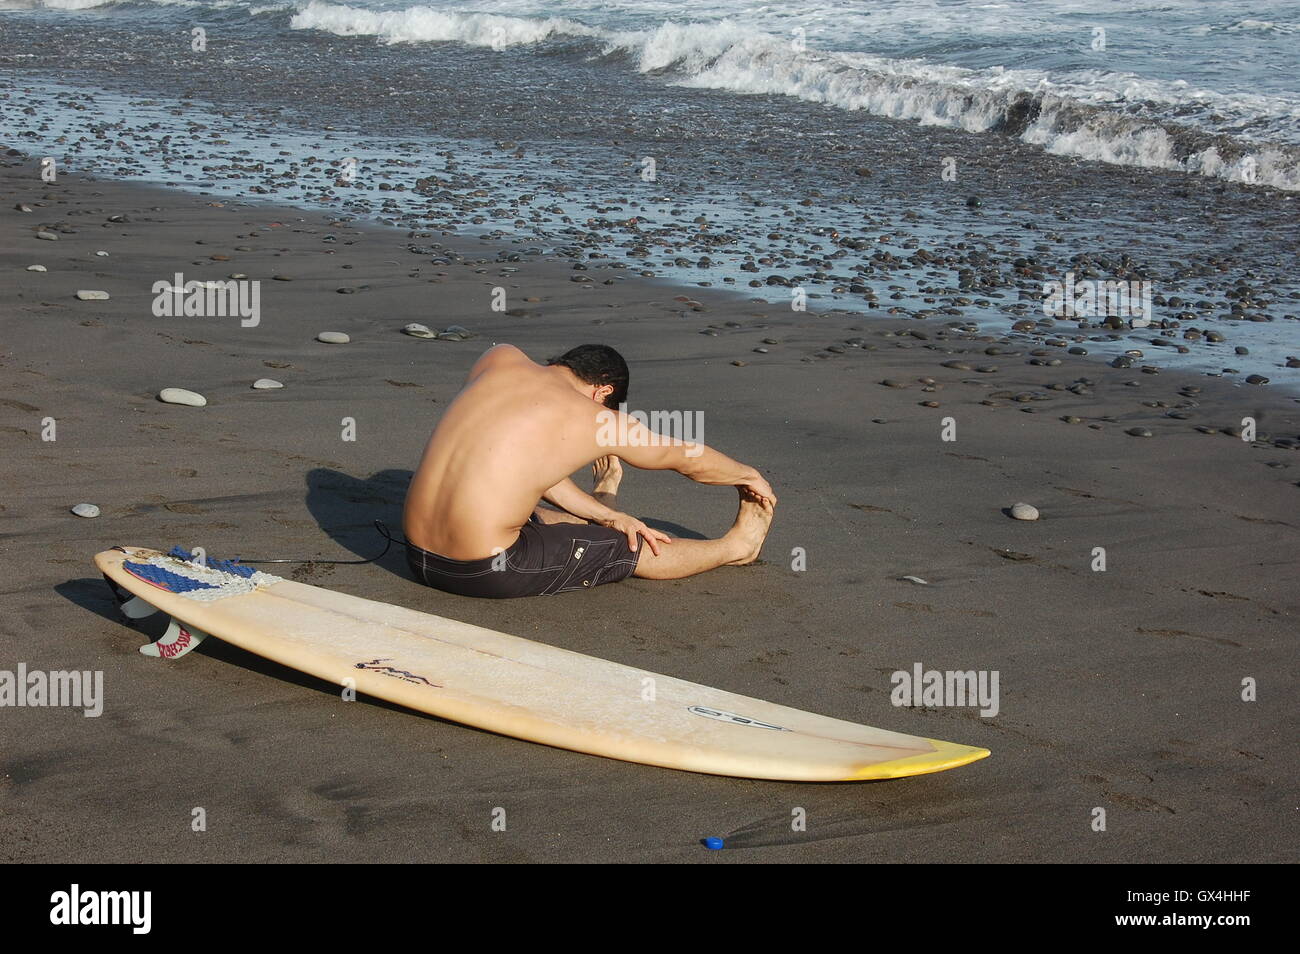 Surfer warming-up Stock Photo